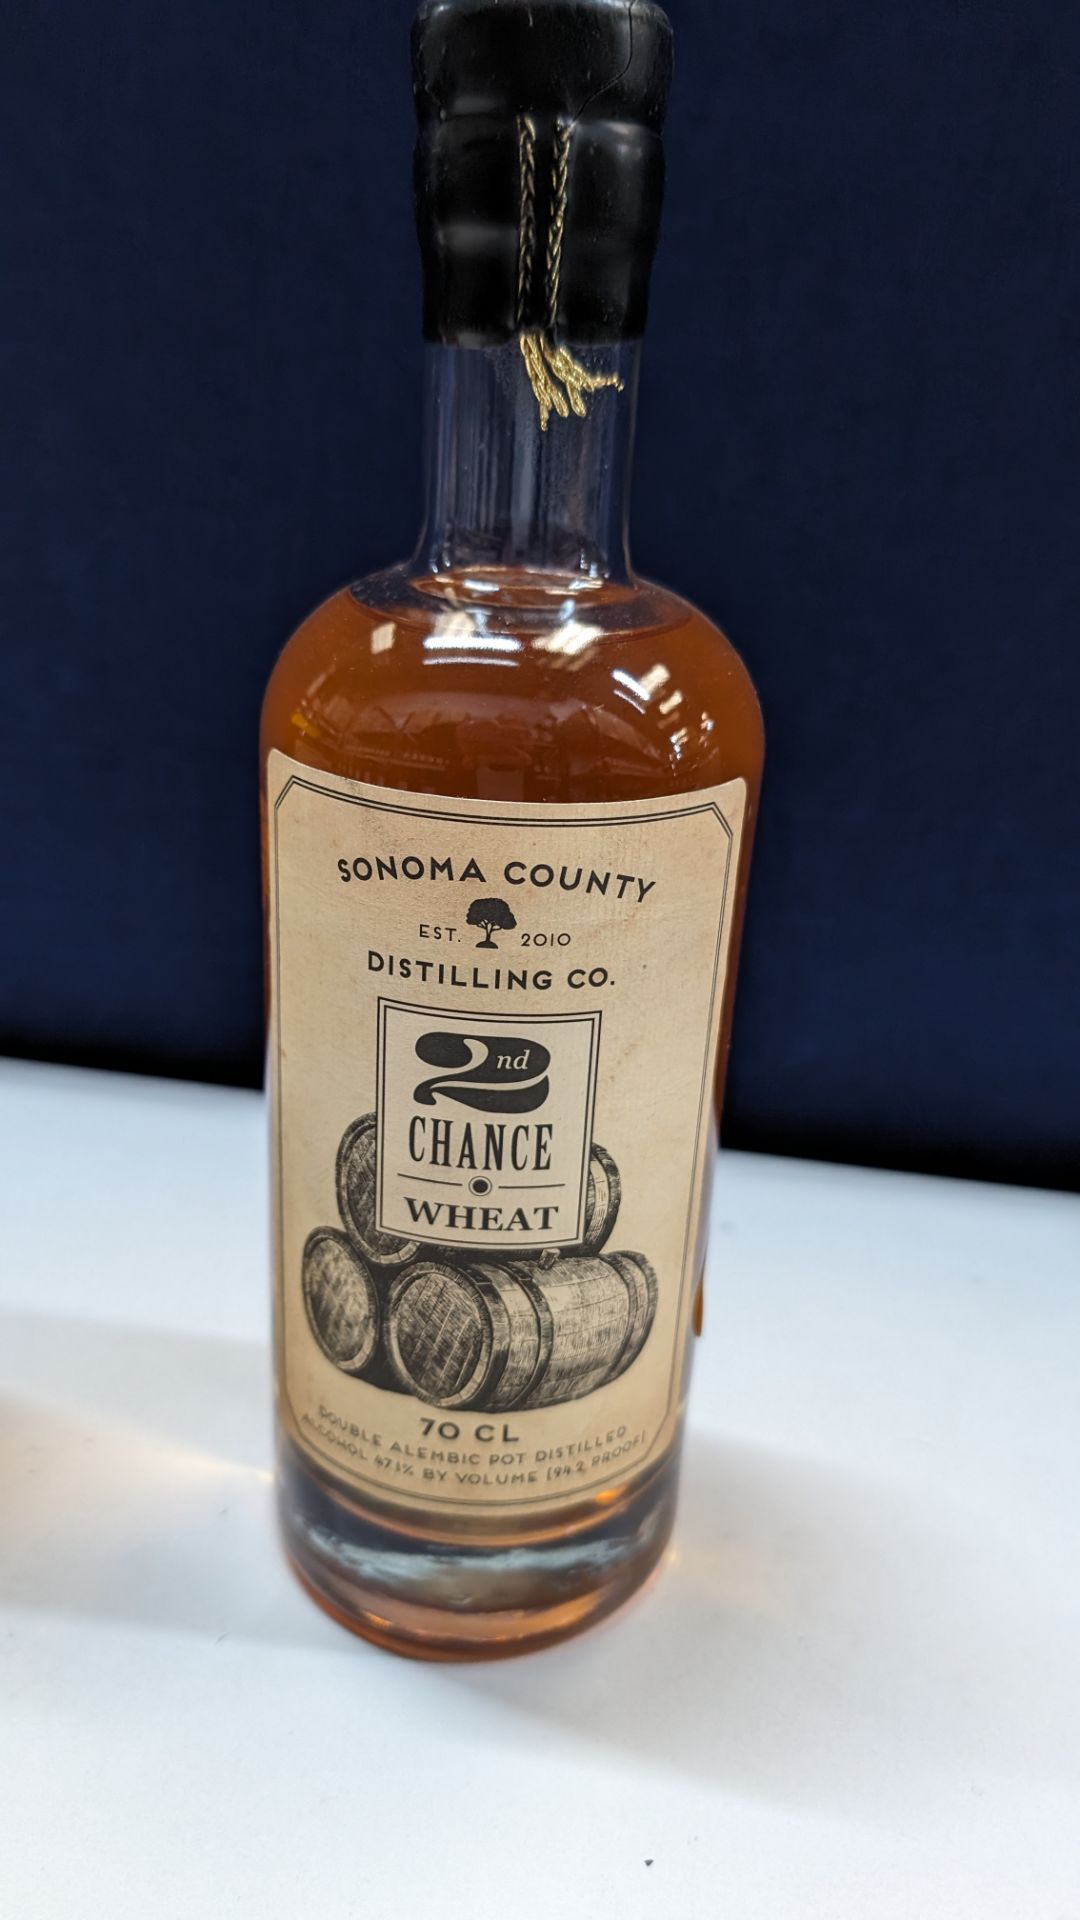 2 off 700ml bottles of Sonoma County 2nd Chance Wheat Double Alembic Pot Distilled Whiskey. 47.1% a - Image 3 of 7